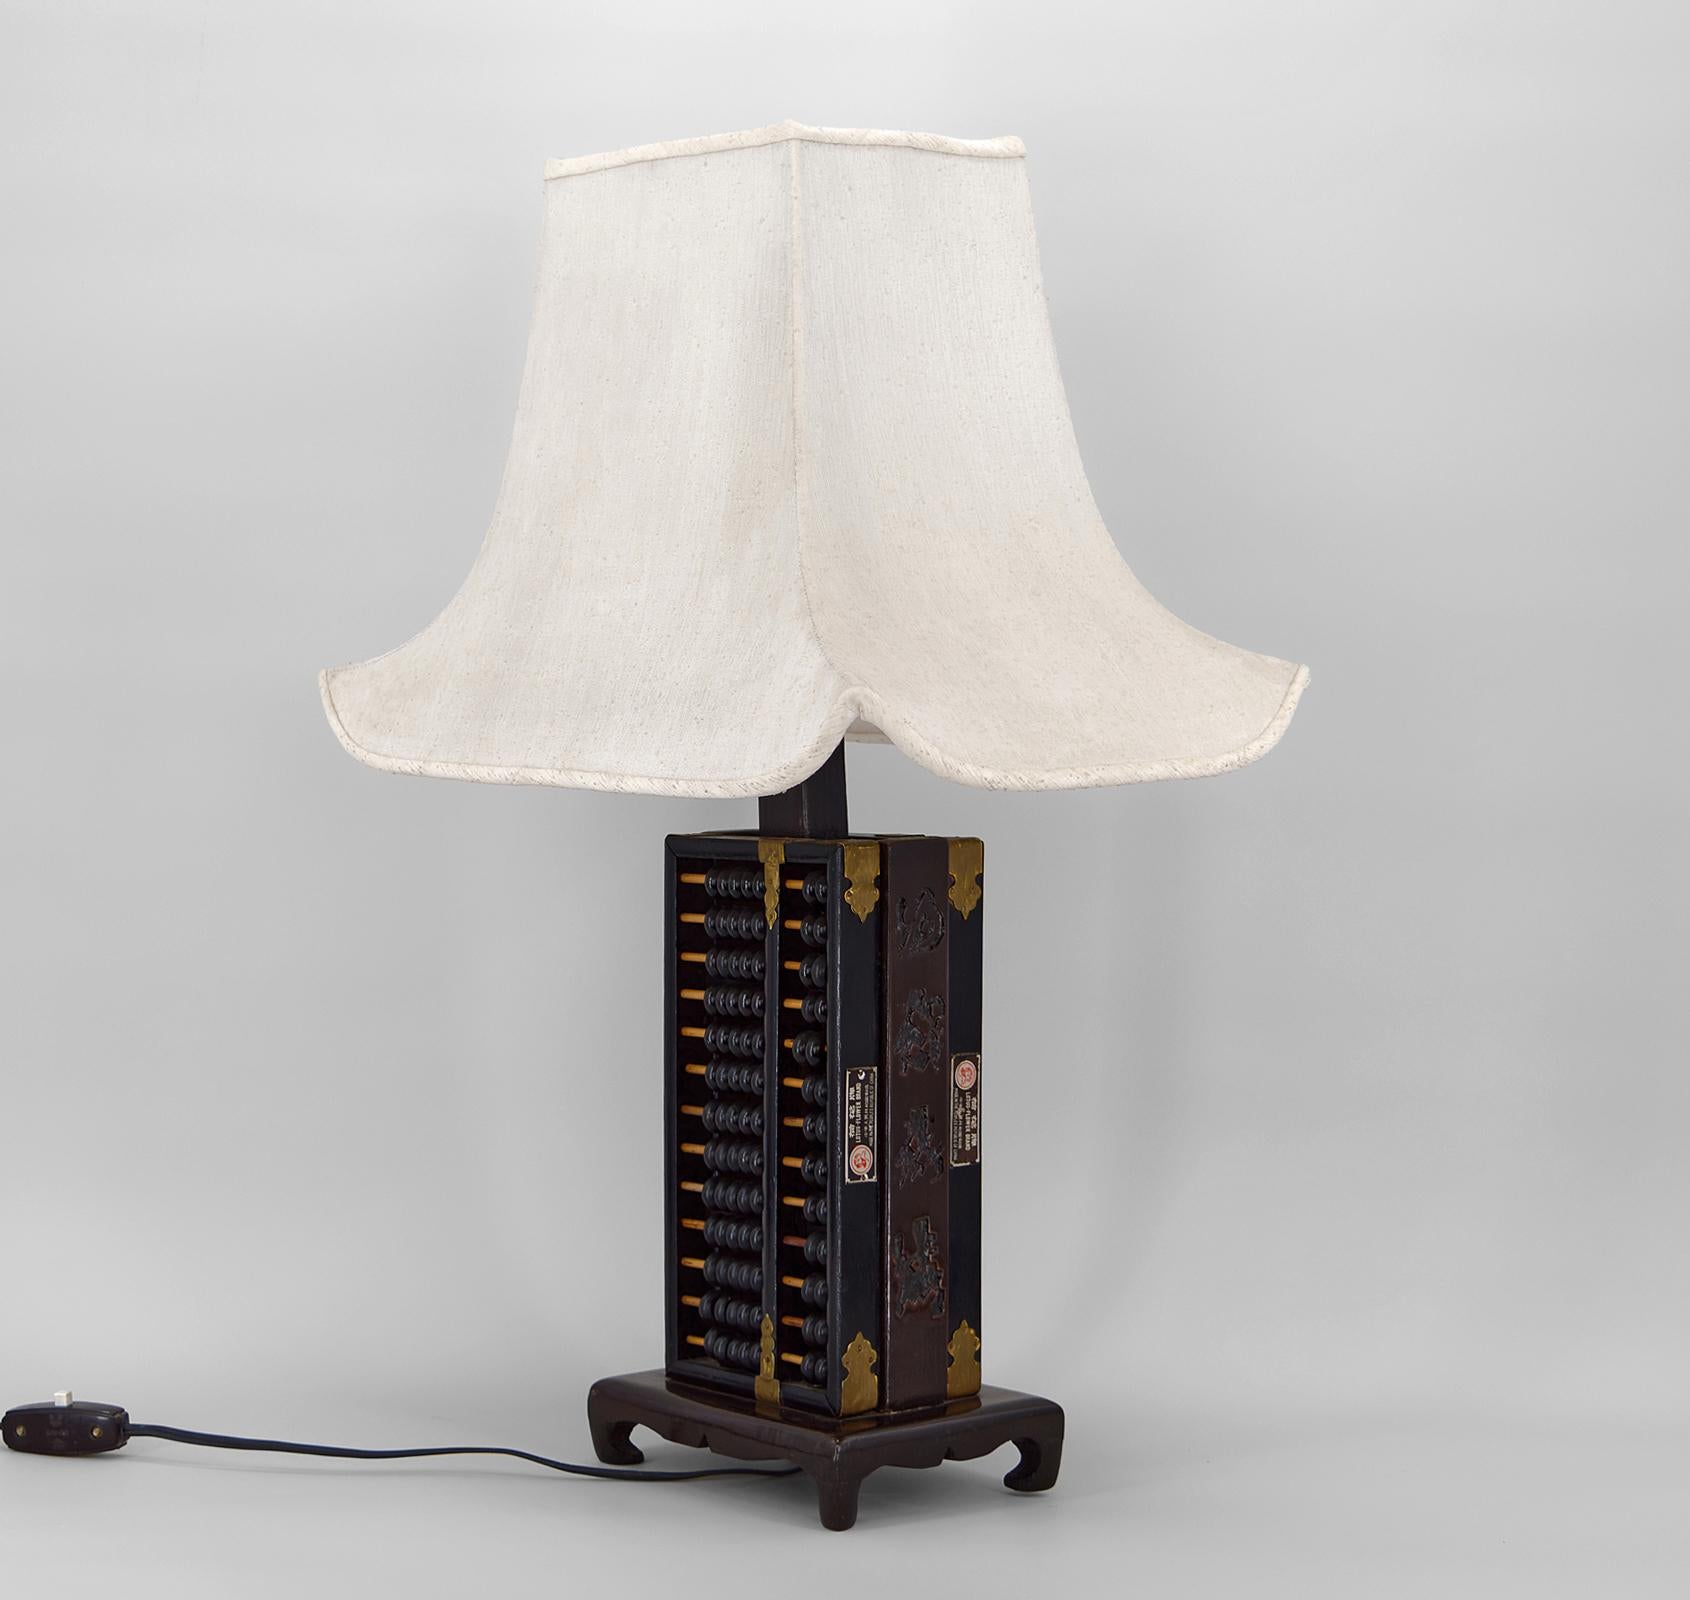 Chinese Export Mid-Century Chinese Abacus / Suanpan Lamp, circa 1950